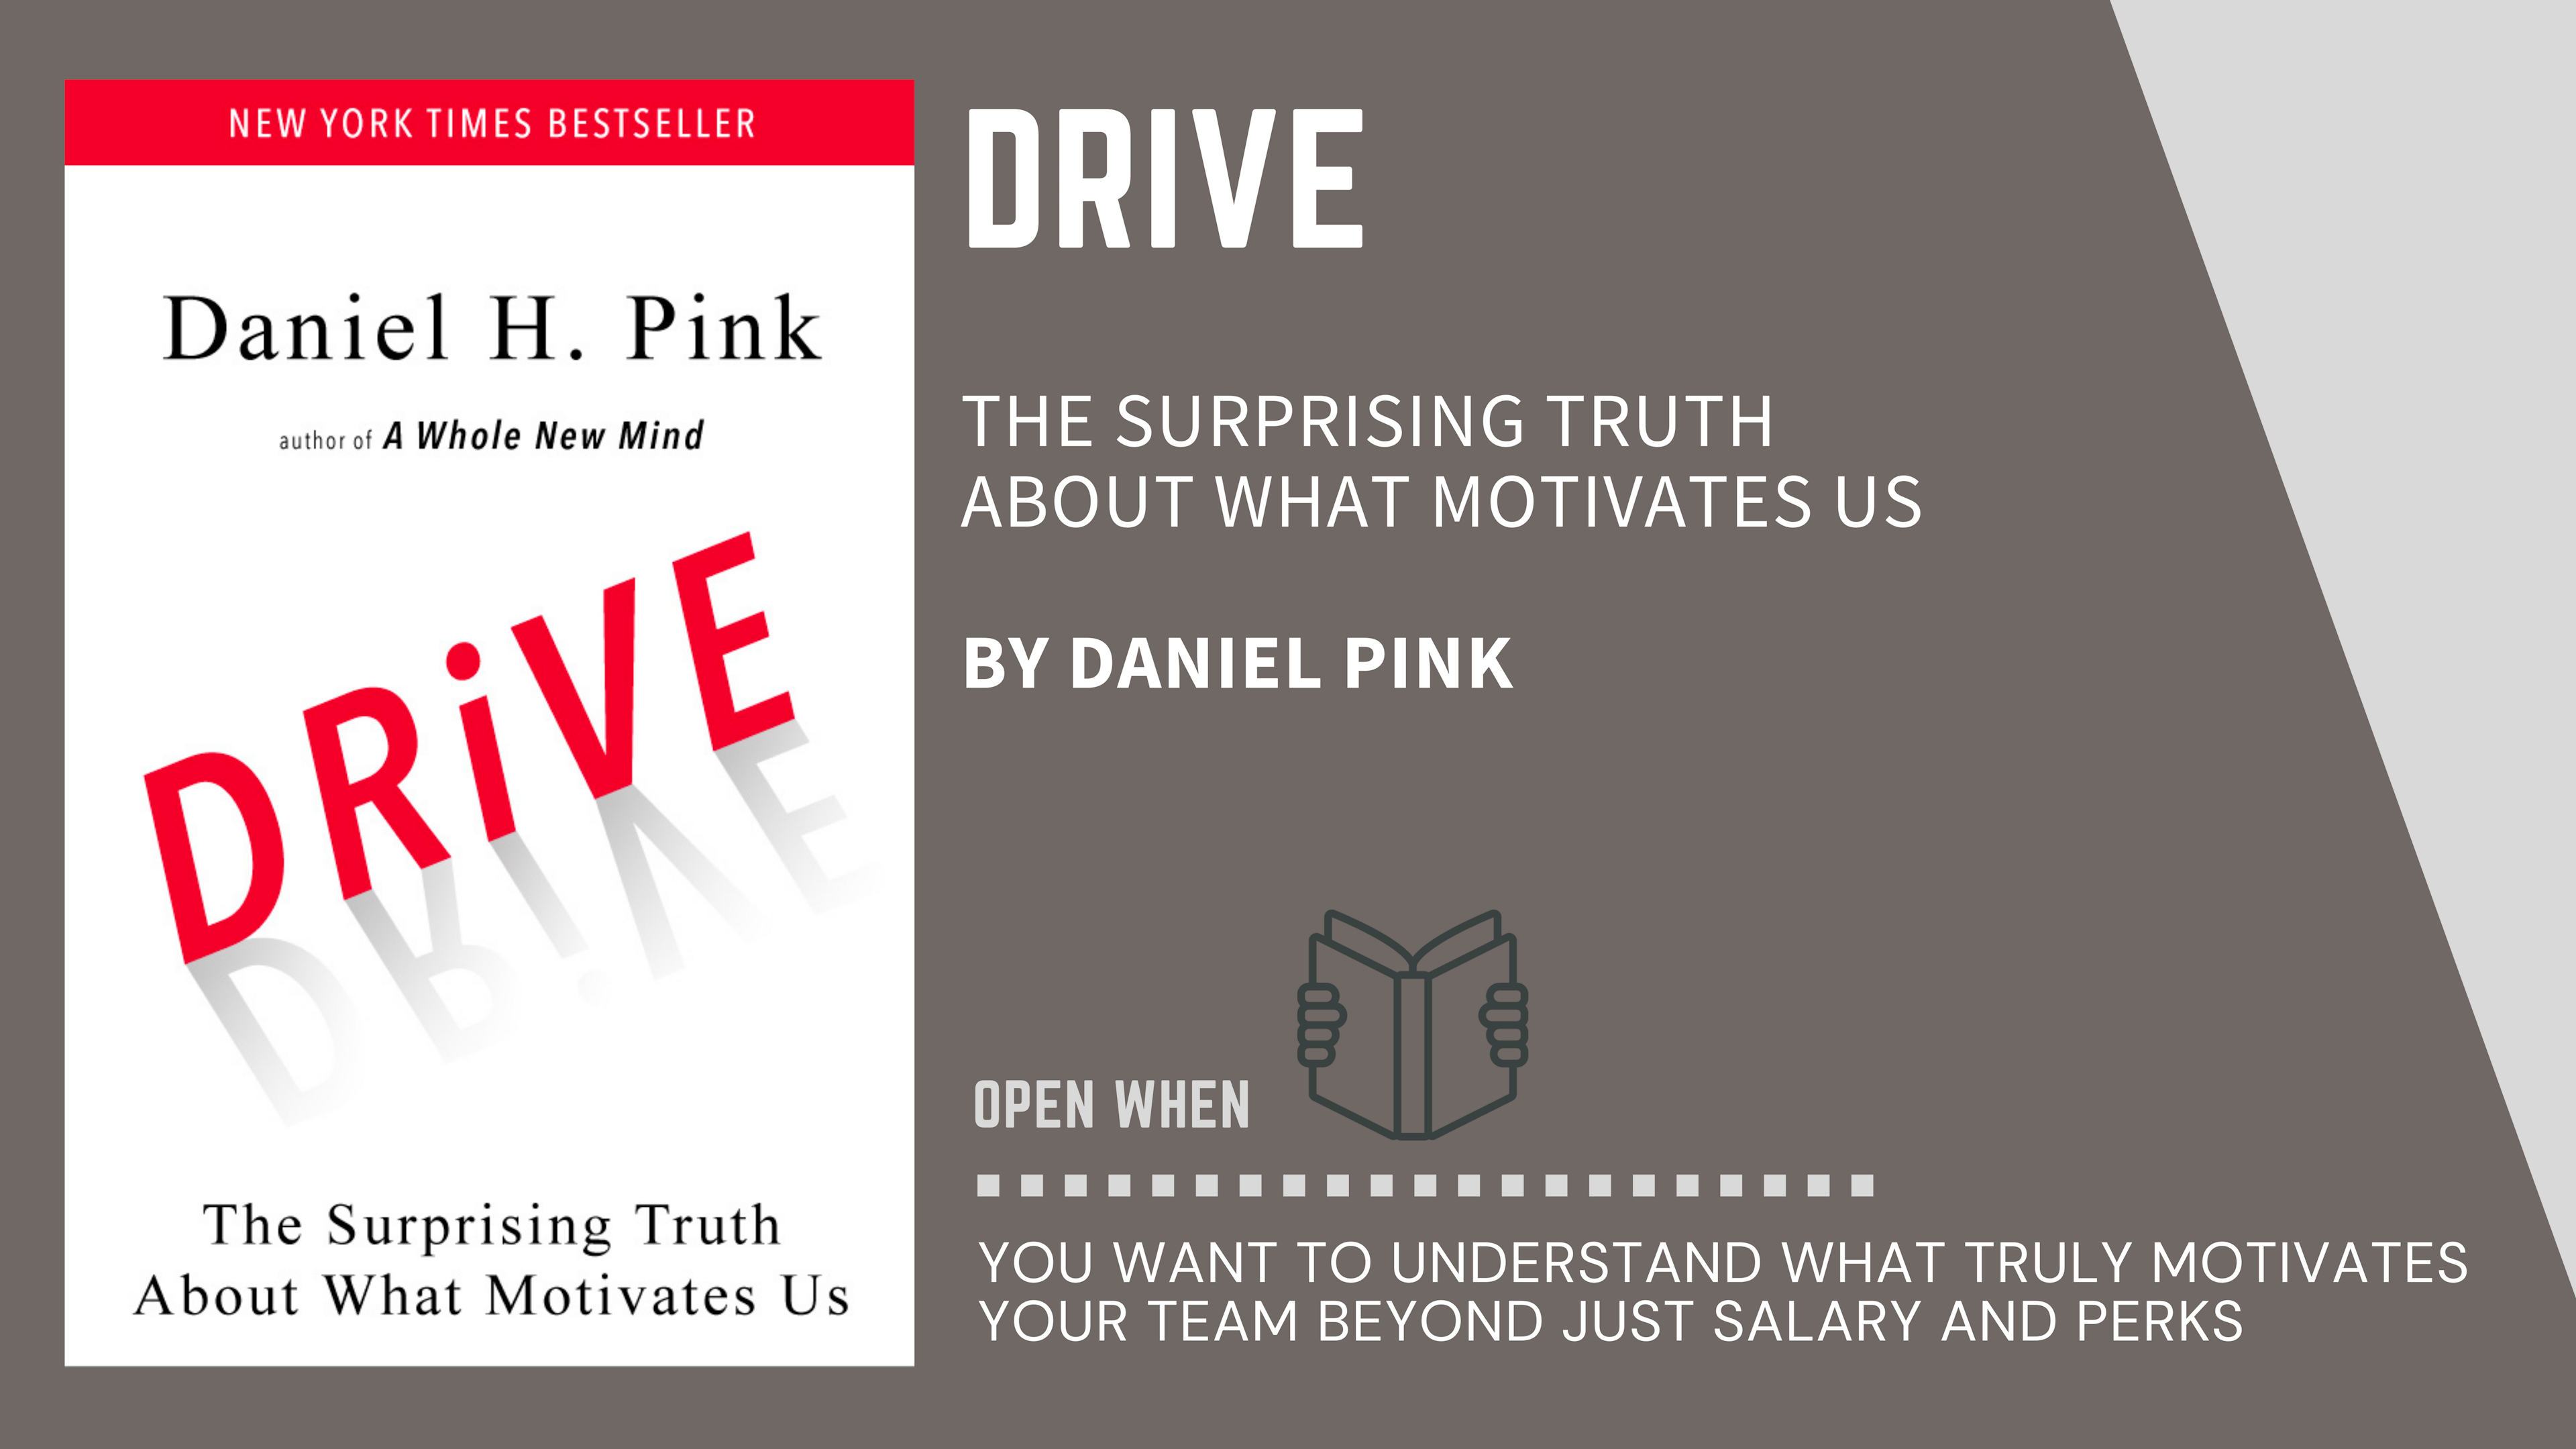 Book Cover of "Drive" by Daniel Pink